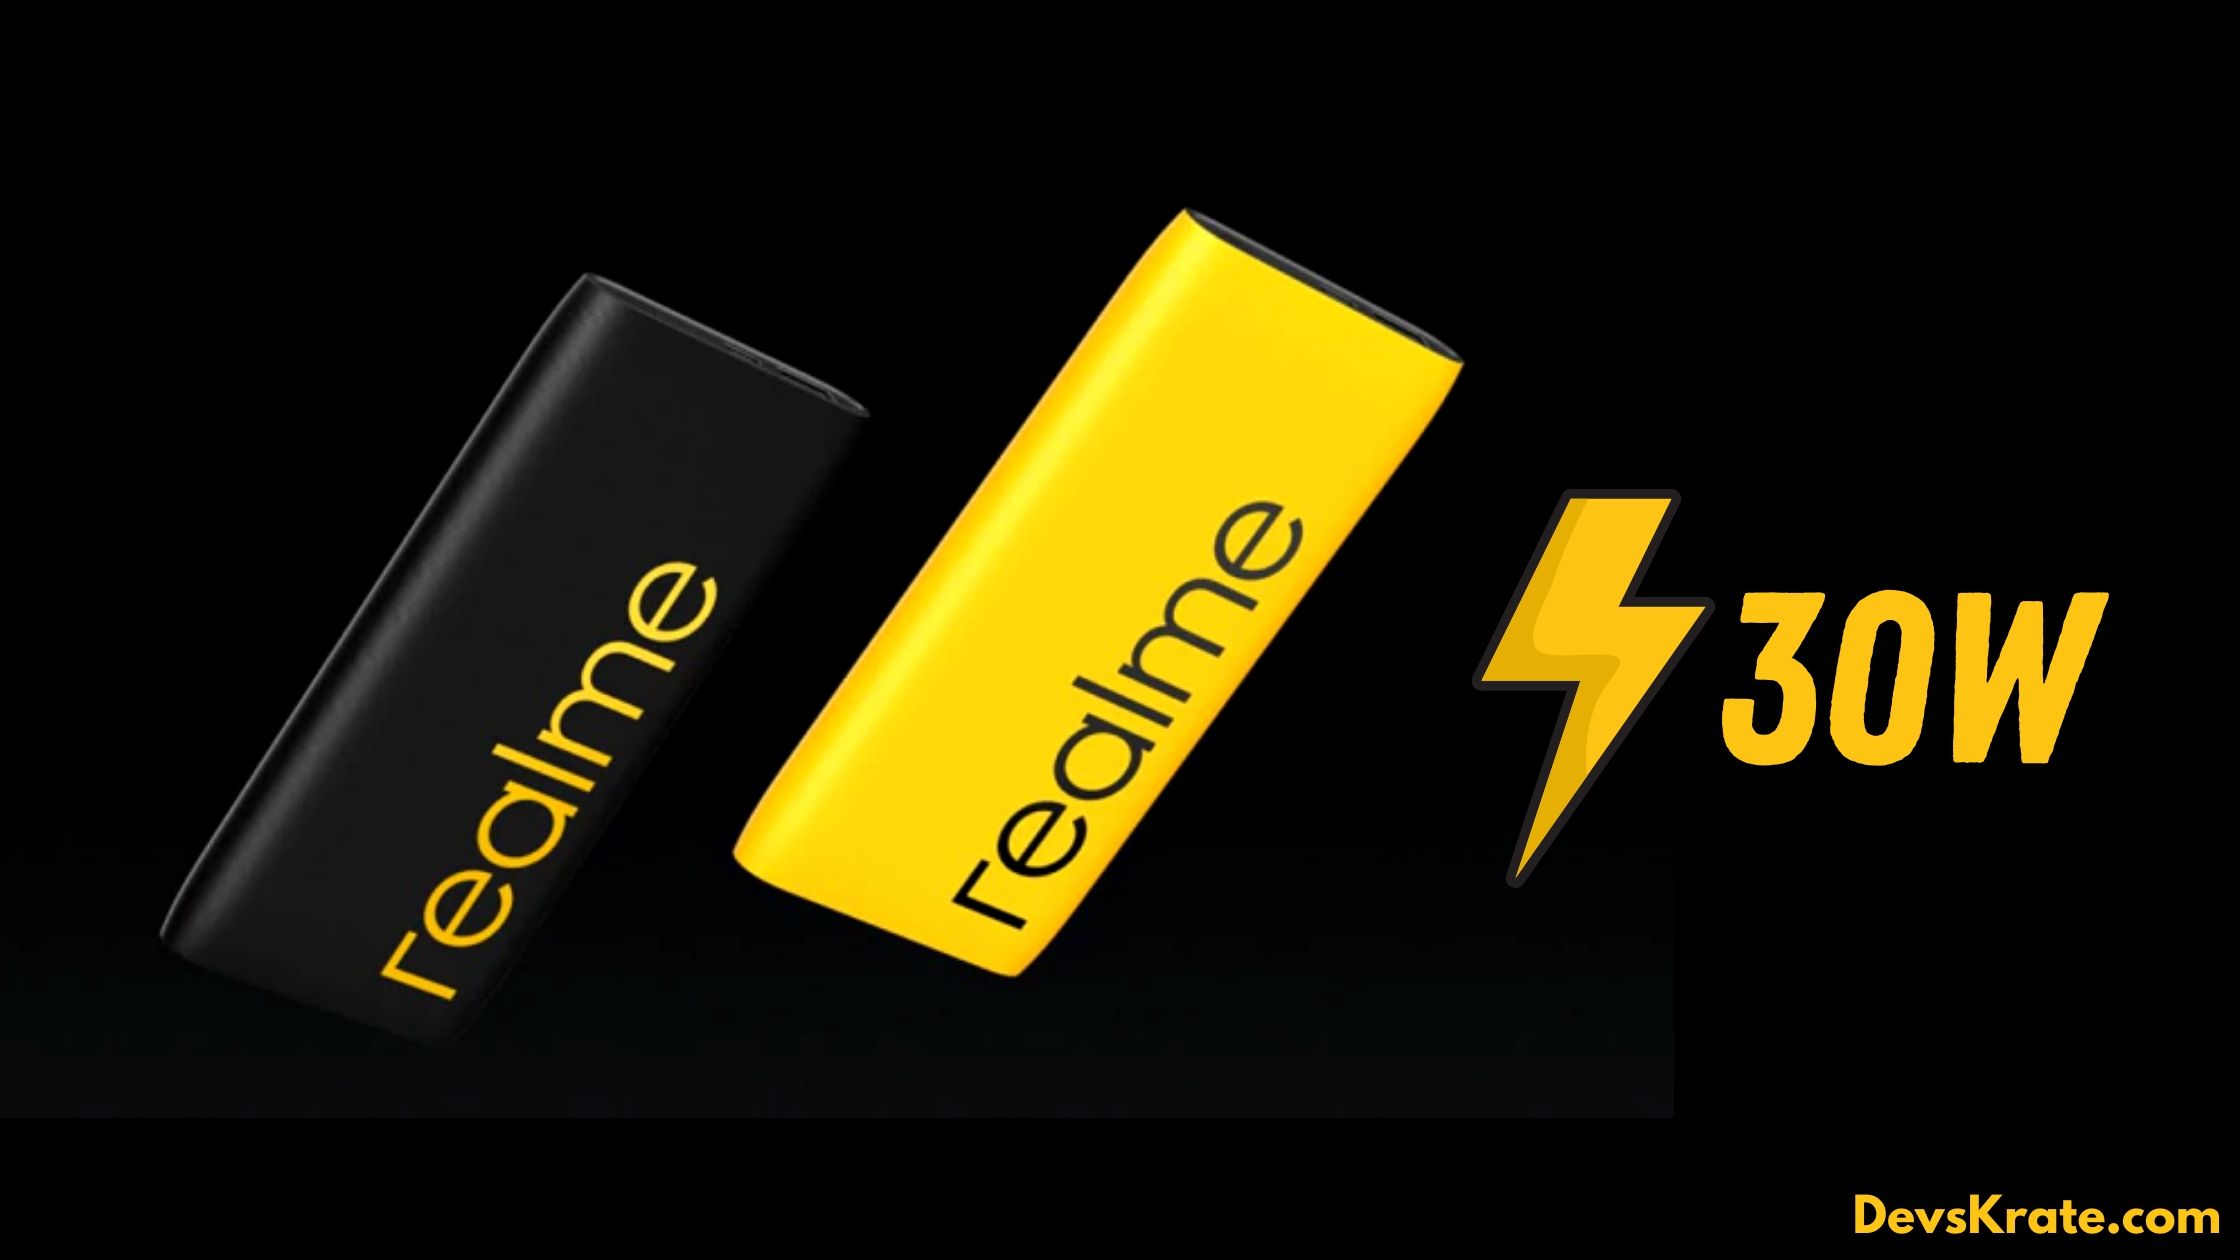 Realme launched 30W Dart Charge Powerbank